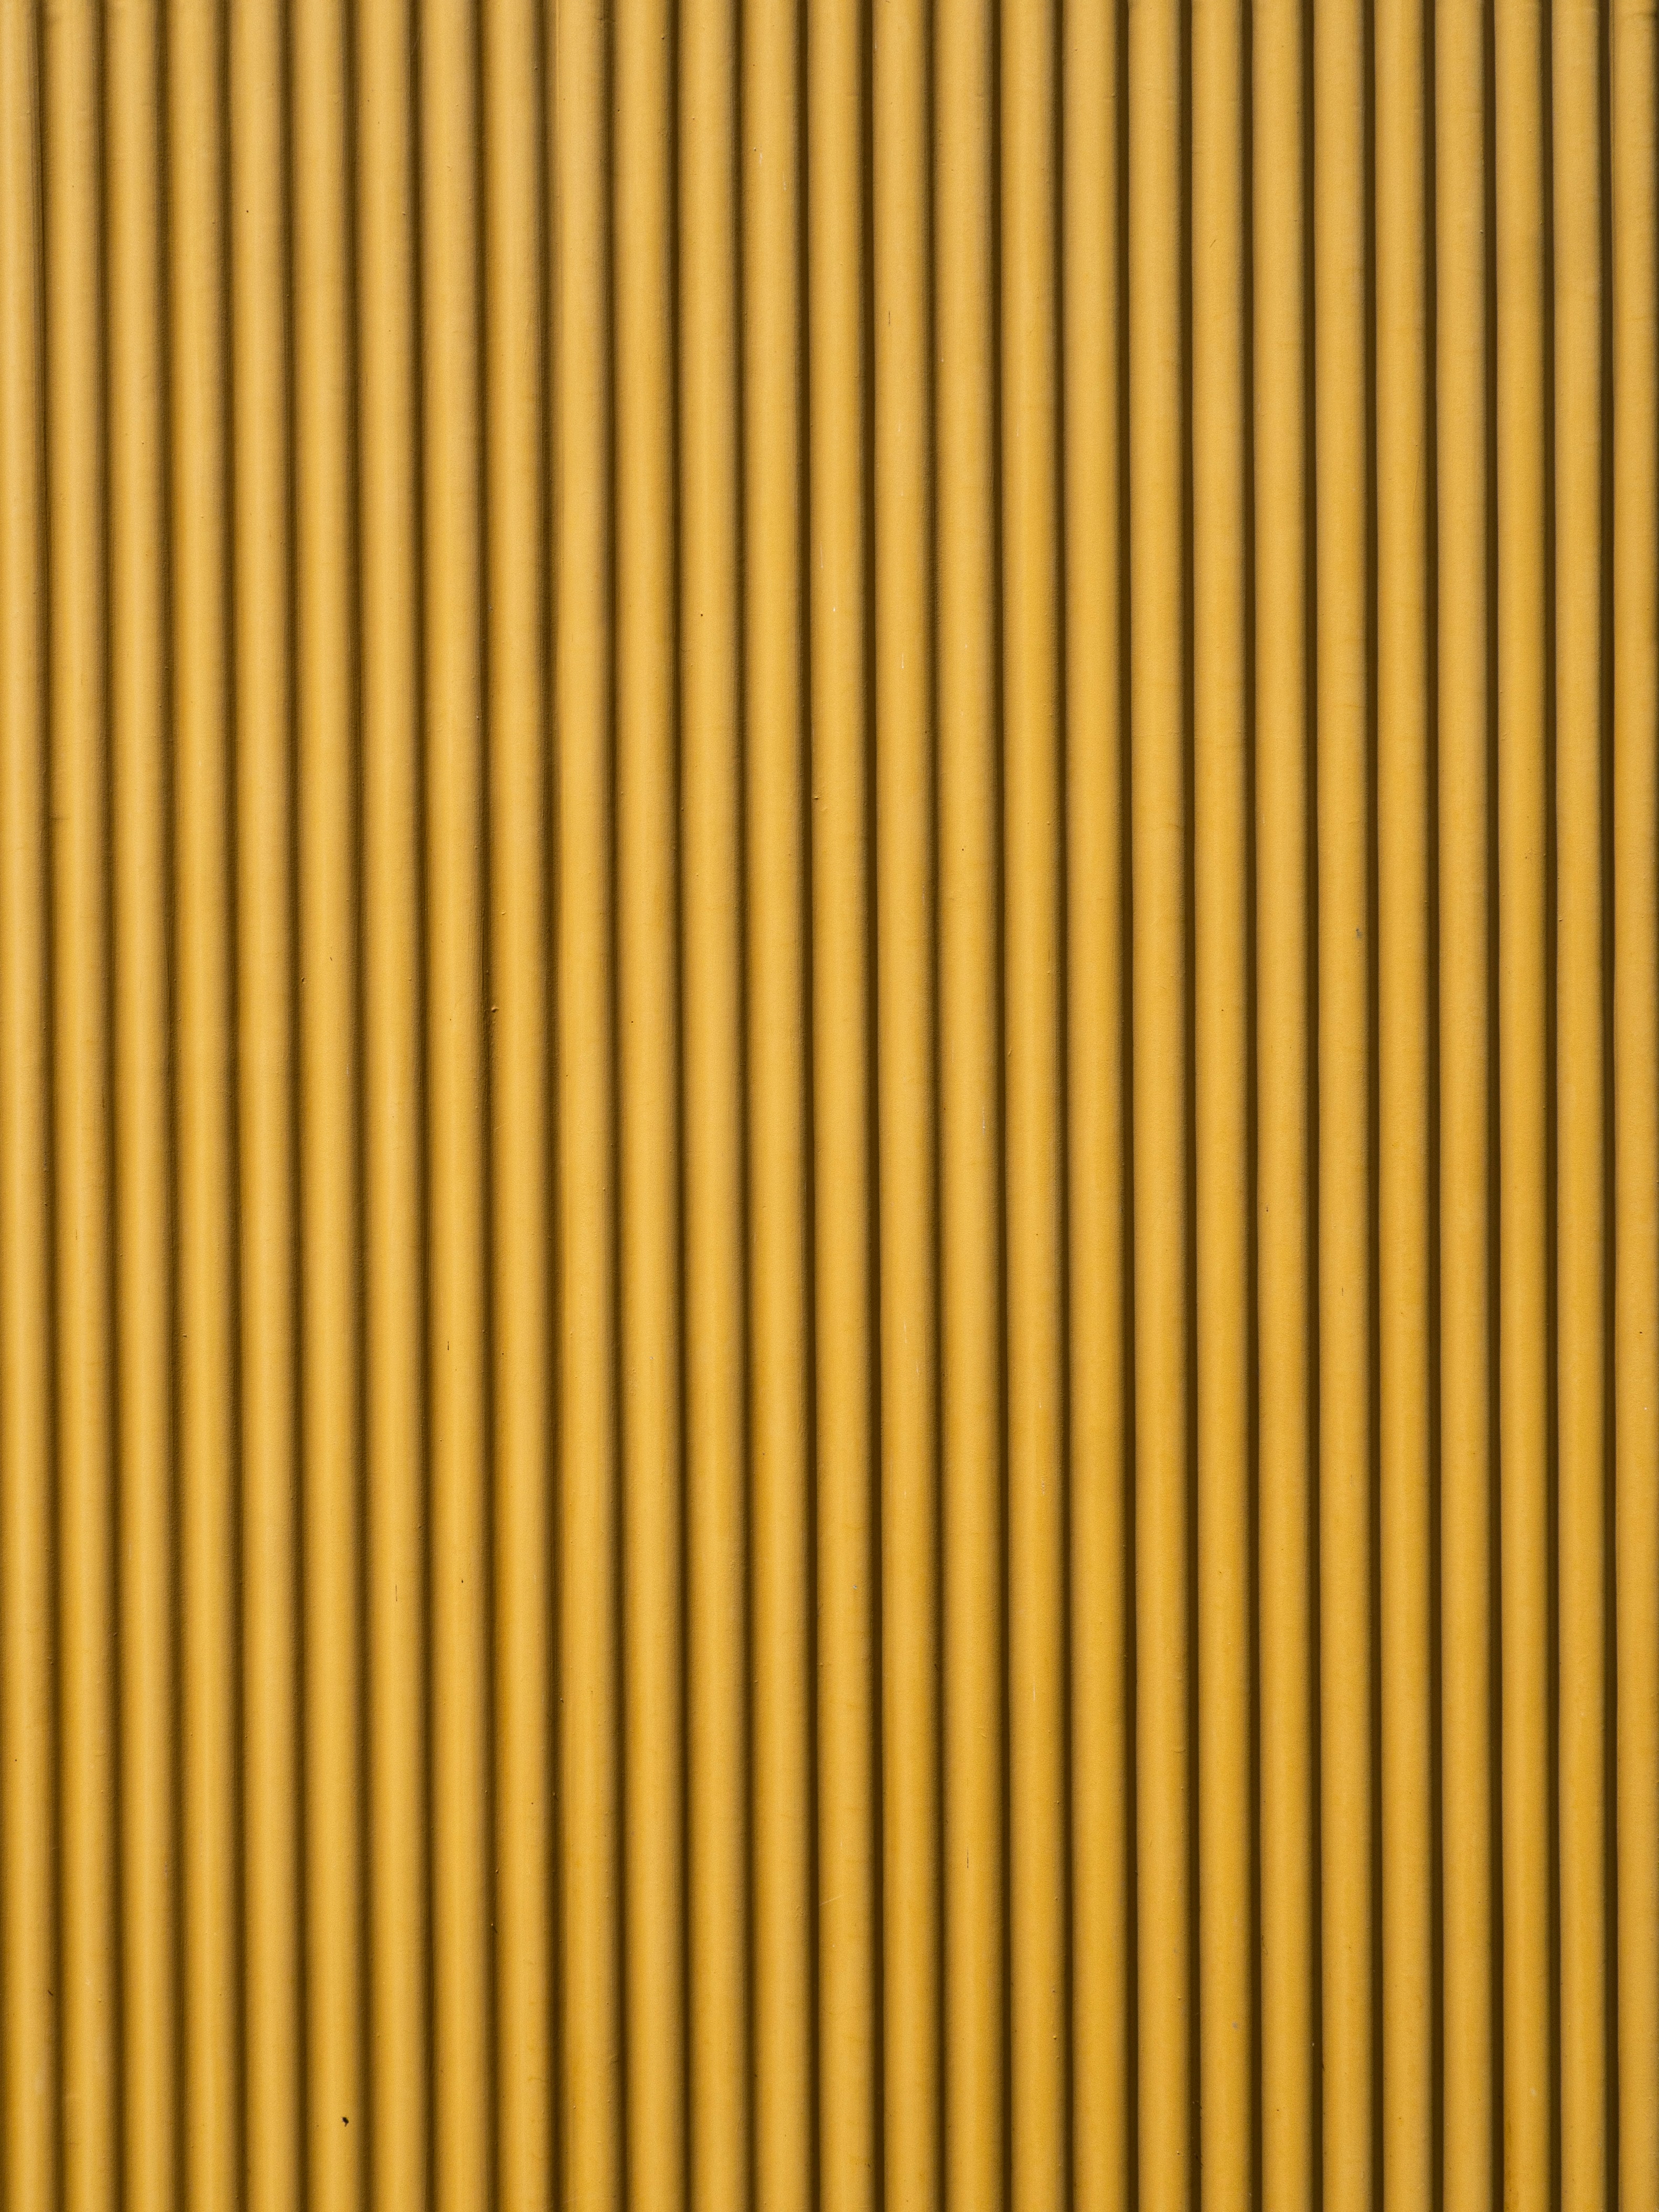 137121 free download Yellow wallpapers for phone, ribbed, stripes, texture, lines Yellow images and screensavers for mobile